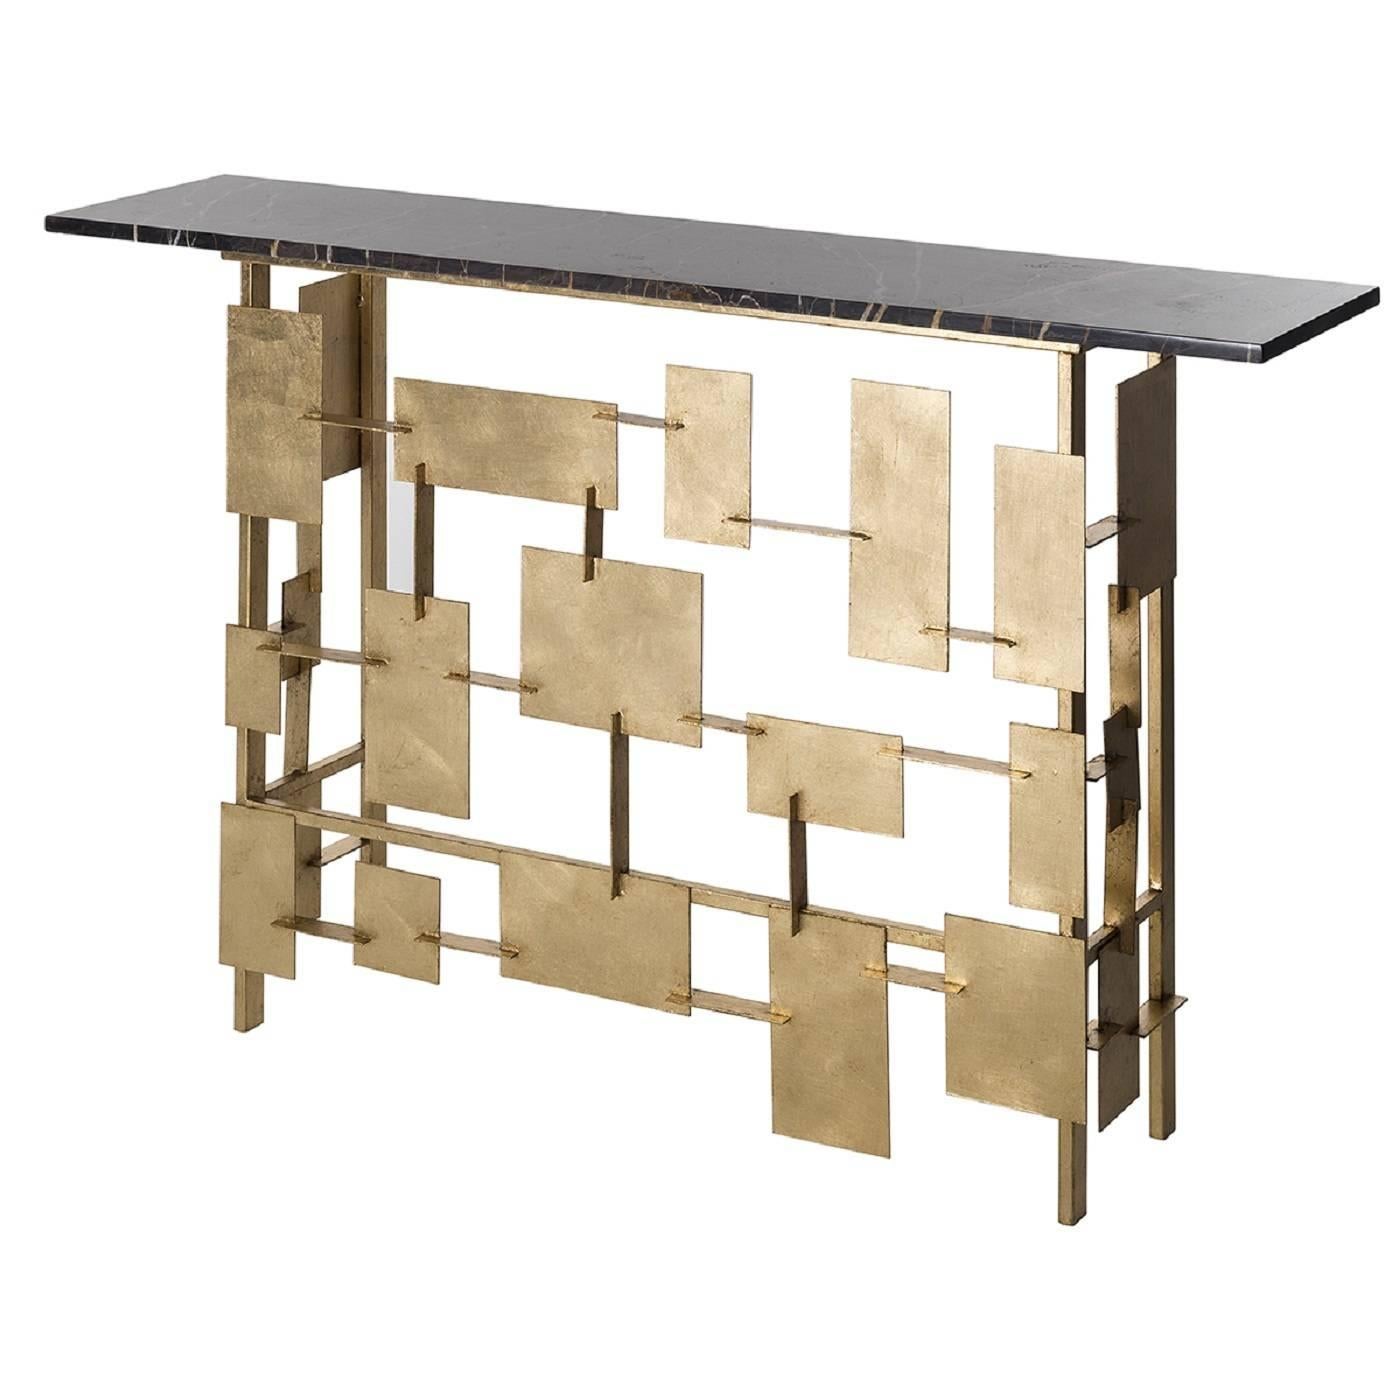 This beautiful console is ideal when placed in a modern environment as it instantly enhances the look of any decor. Part of the Raymond collection, it has an iron structure with abstract elements decorated with metal leaf. The top is in black